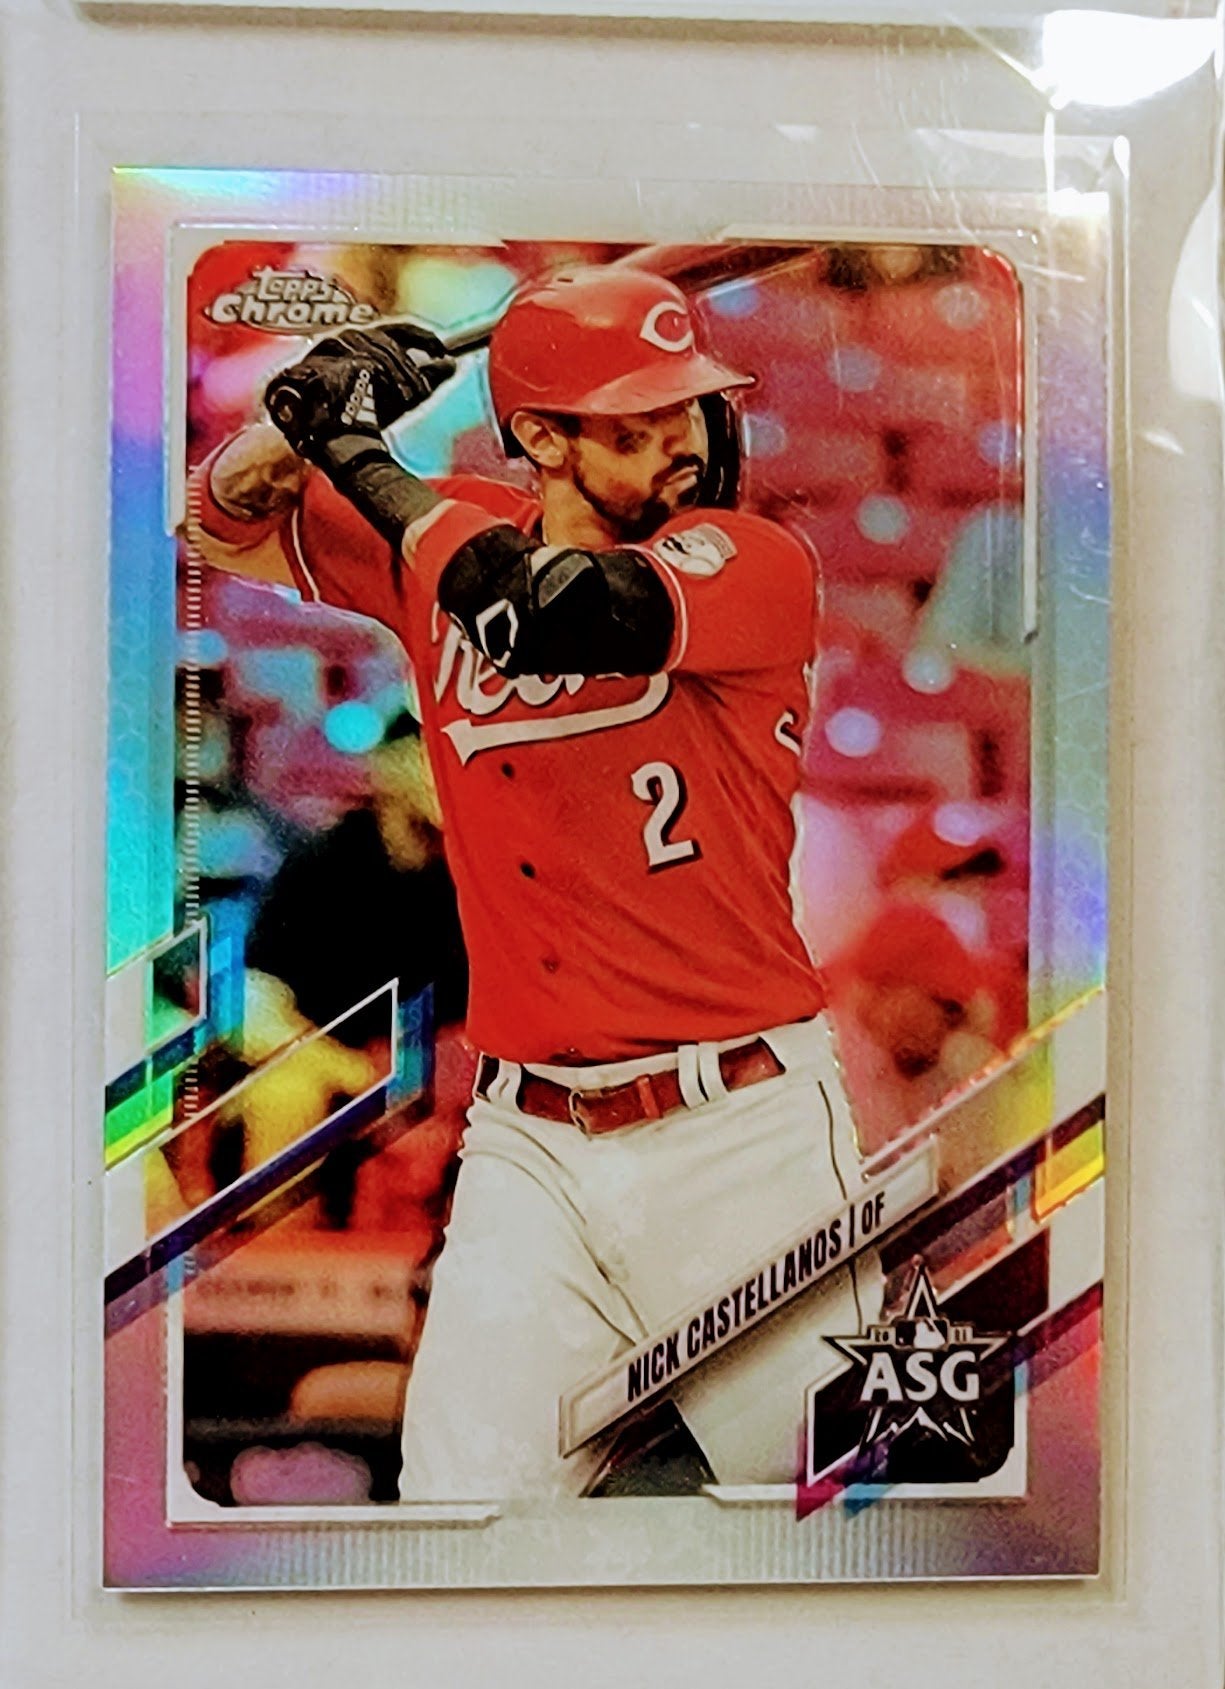 2021 Topps Chrome Update Nick Castellanos All Star Game Refractor Baseball Card AVM1 simple Xclusive Collectibles   